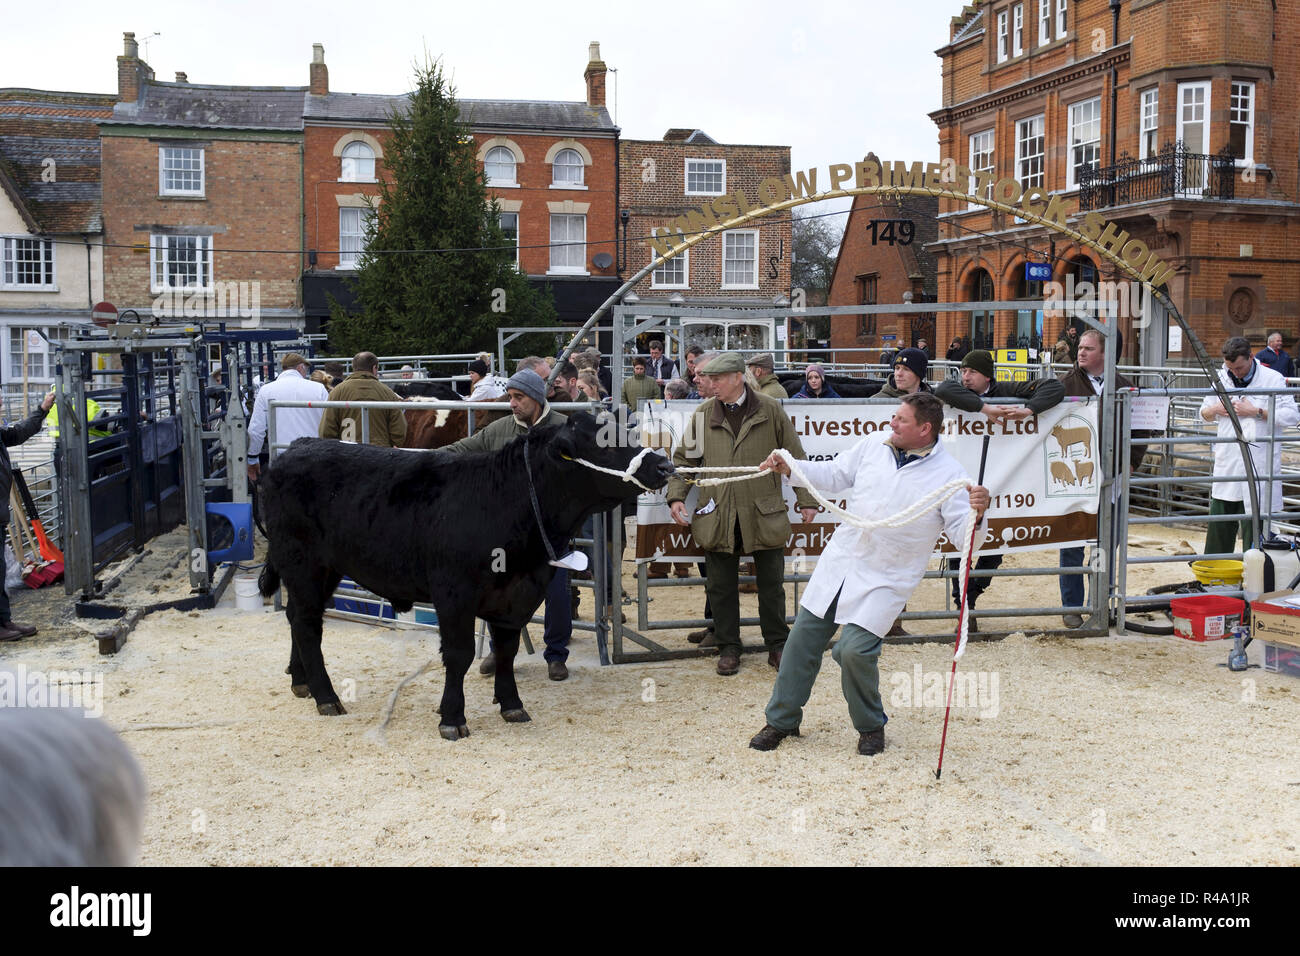 Winslow, UK - November 26, 2018. Cattle are sold by auction at the Winslow Primestock Show. The show is an annual event held in the historic market town in Buckinghamshire. Credit: Paul Maguire/Alamy Live News Stock Photo